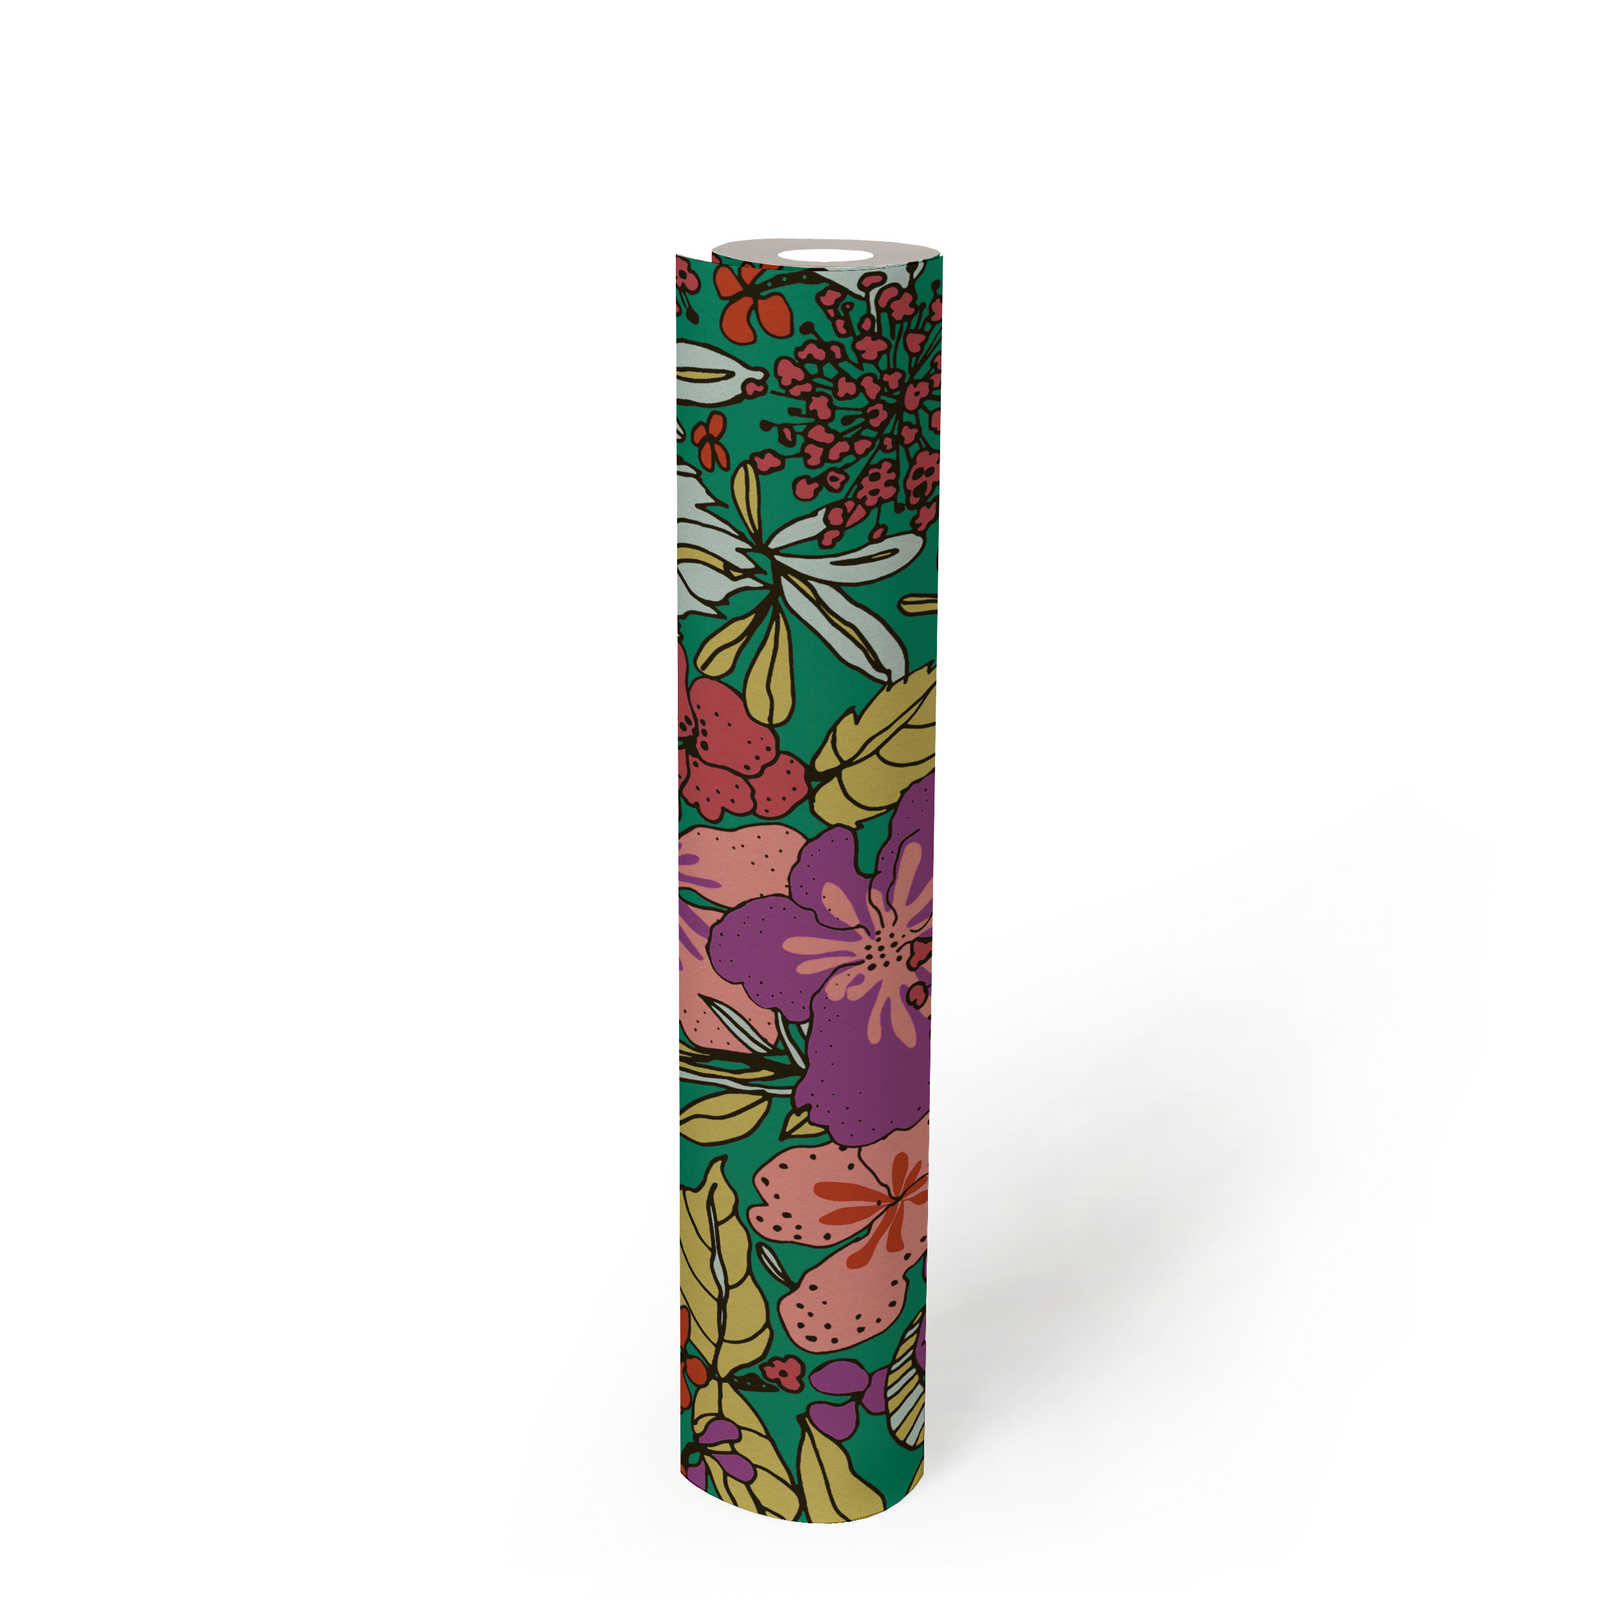             wallpaper flowers pattern colourful in colour block style - colourful, green, red
        